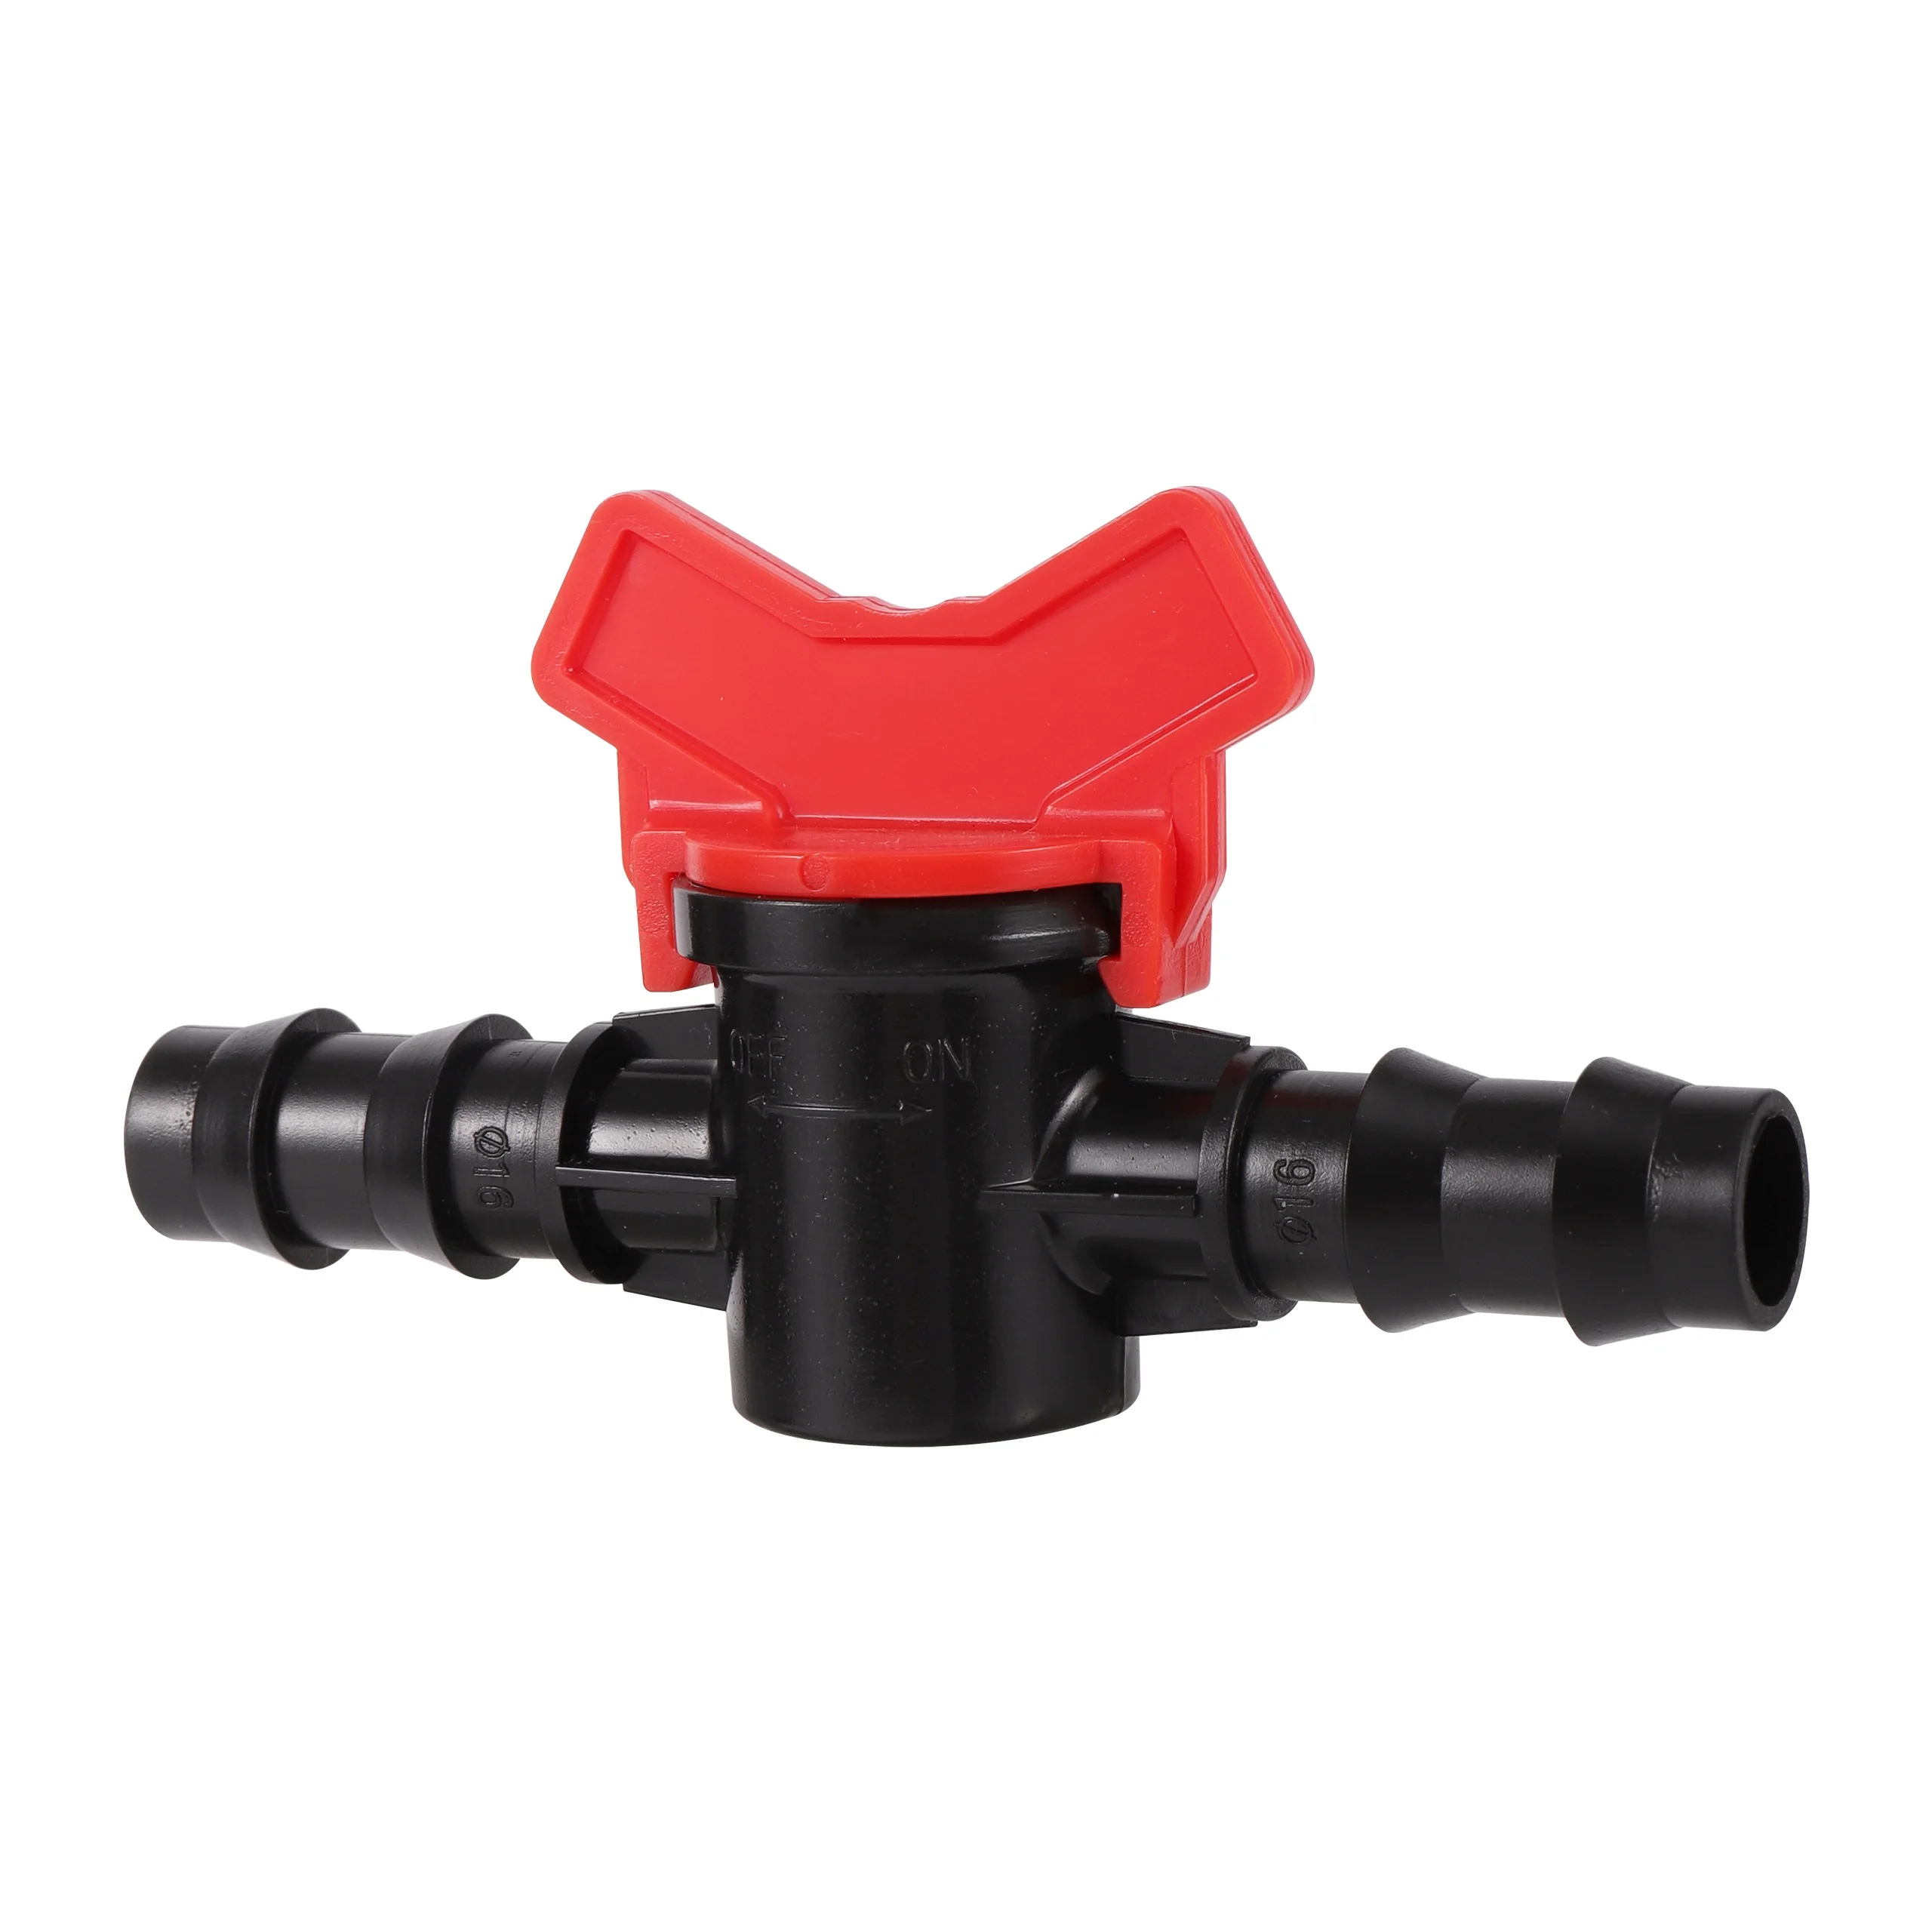 1/2 Inch Pipe Valve Hose Control Valve Irrigation Systems Watering Control Switch Garden Hose Control Valve Pipe Fittings 1 Pc